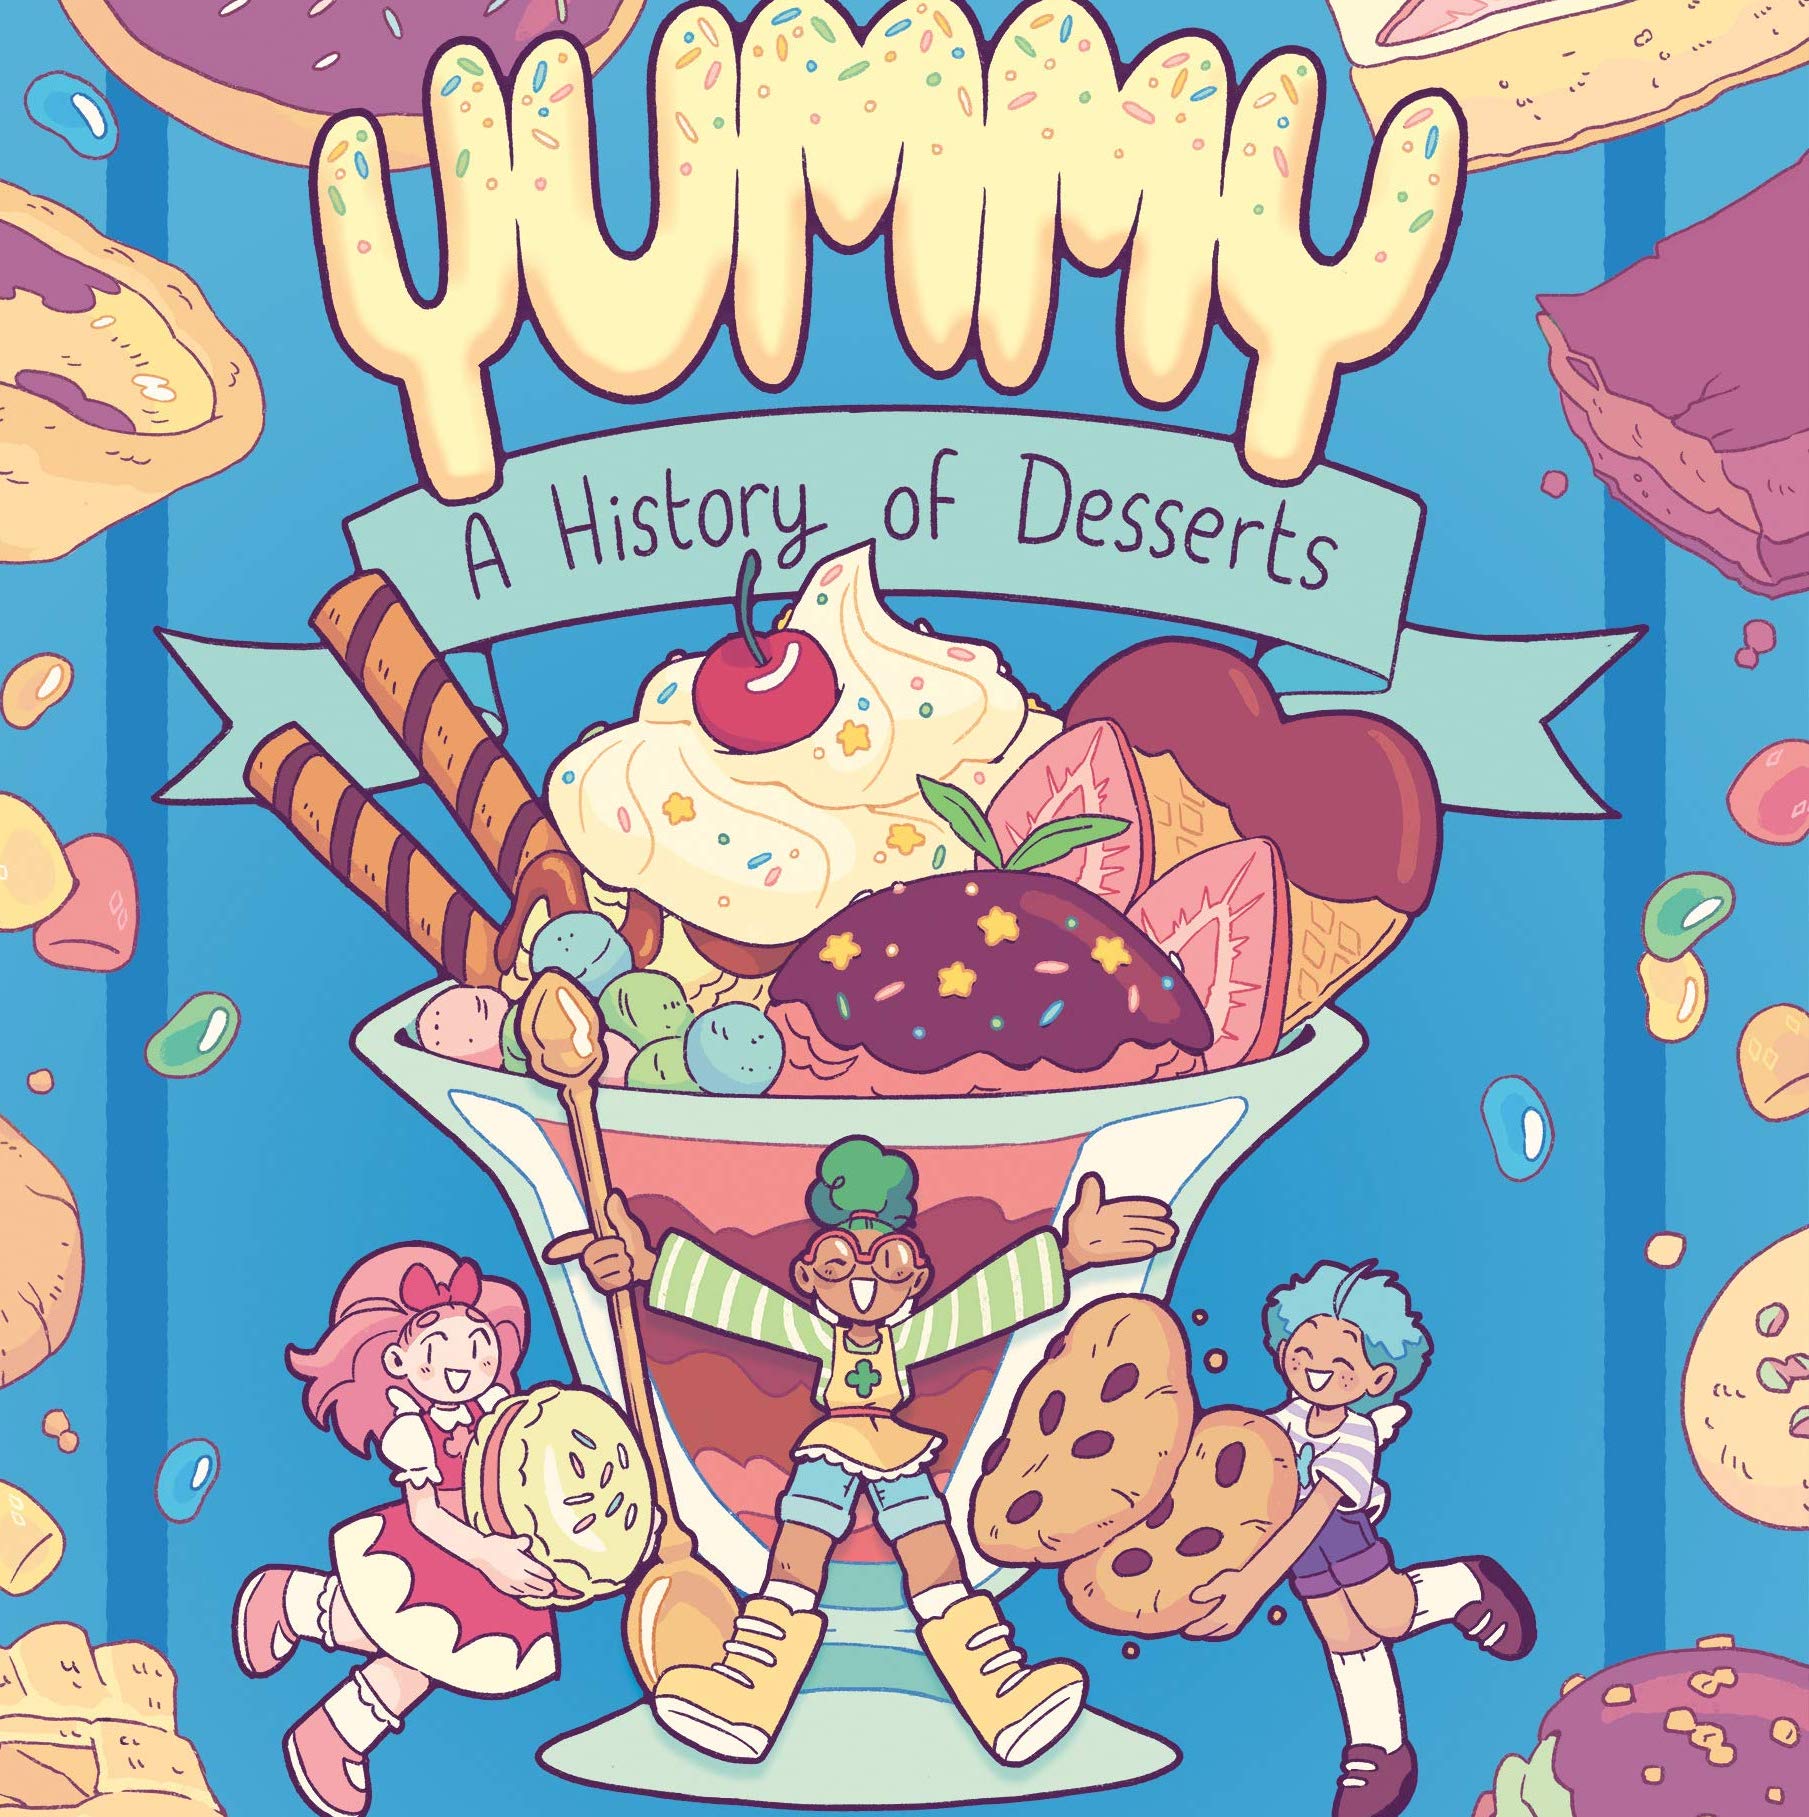 'Yummy: A History of Desserts' is a sweet and informative tribute to the goodies we love